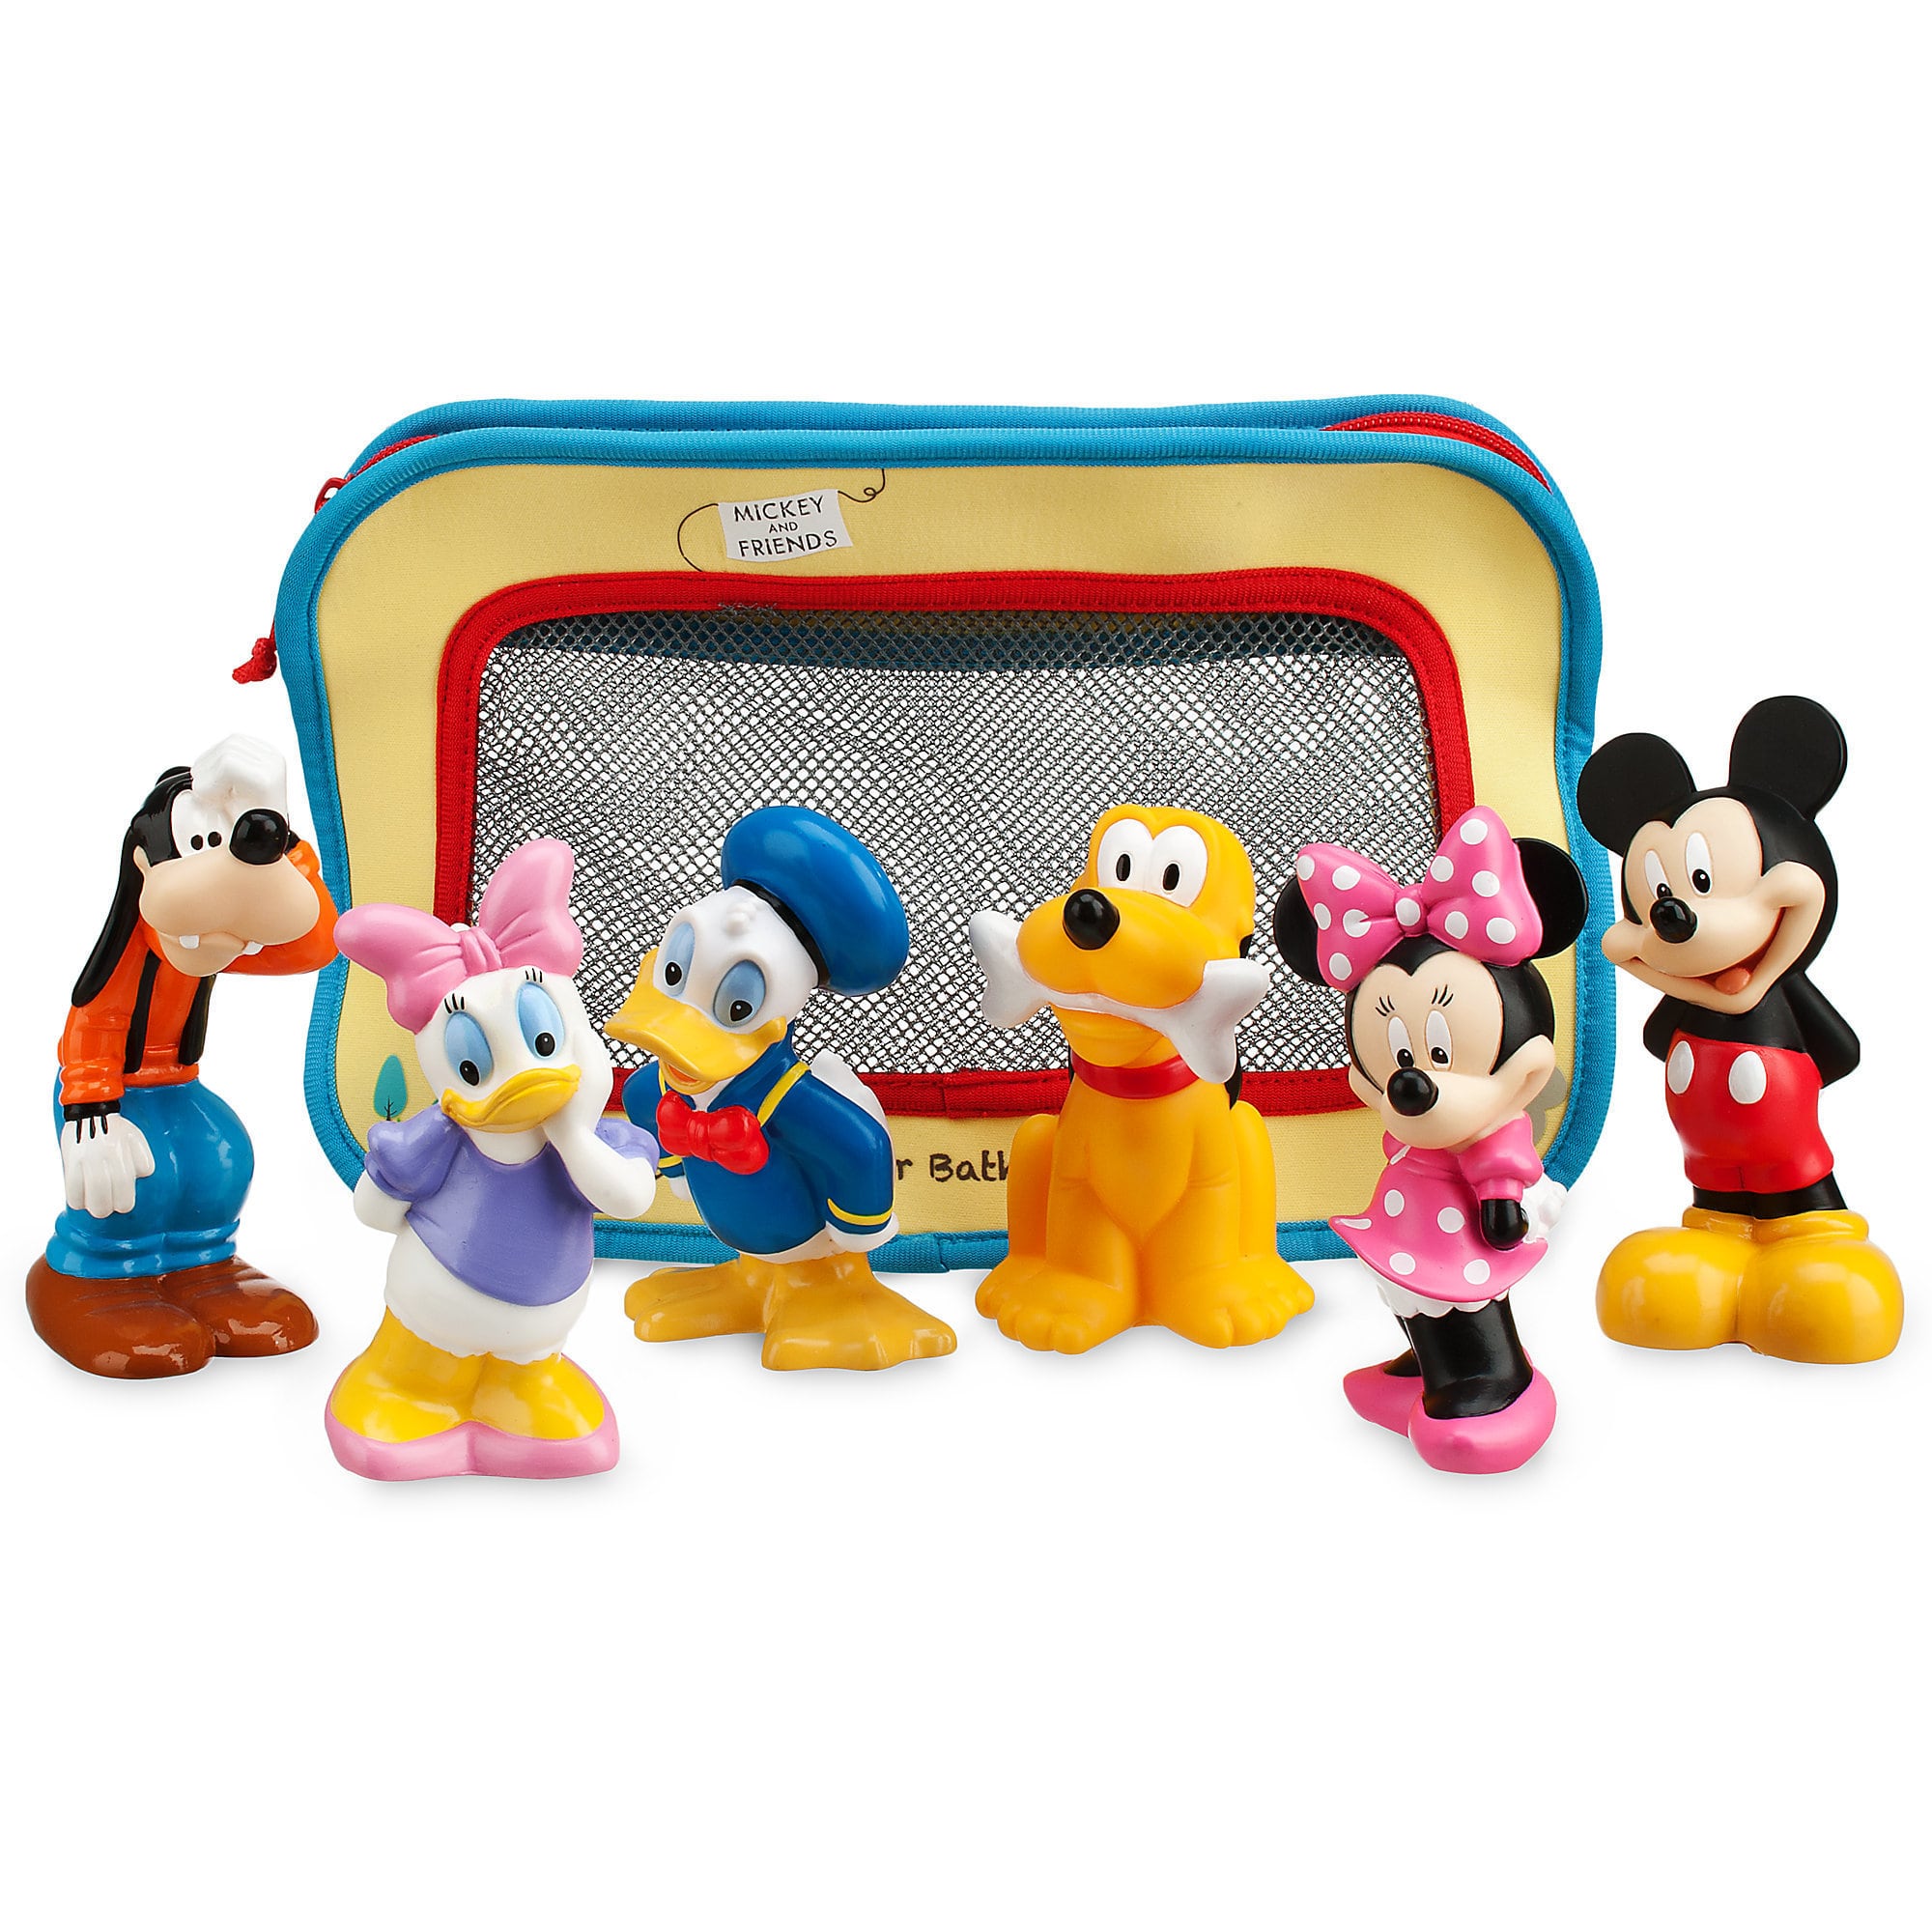 Toddlers and preschoolers will love these Mickey Mouse bath toys | Top 25 Disney Gift Ideas for Toddlers featured by top US Disney blogger, Marcie and the Mouse